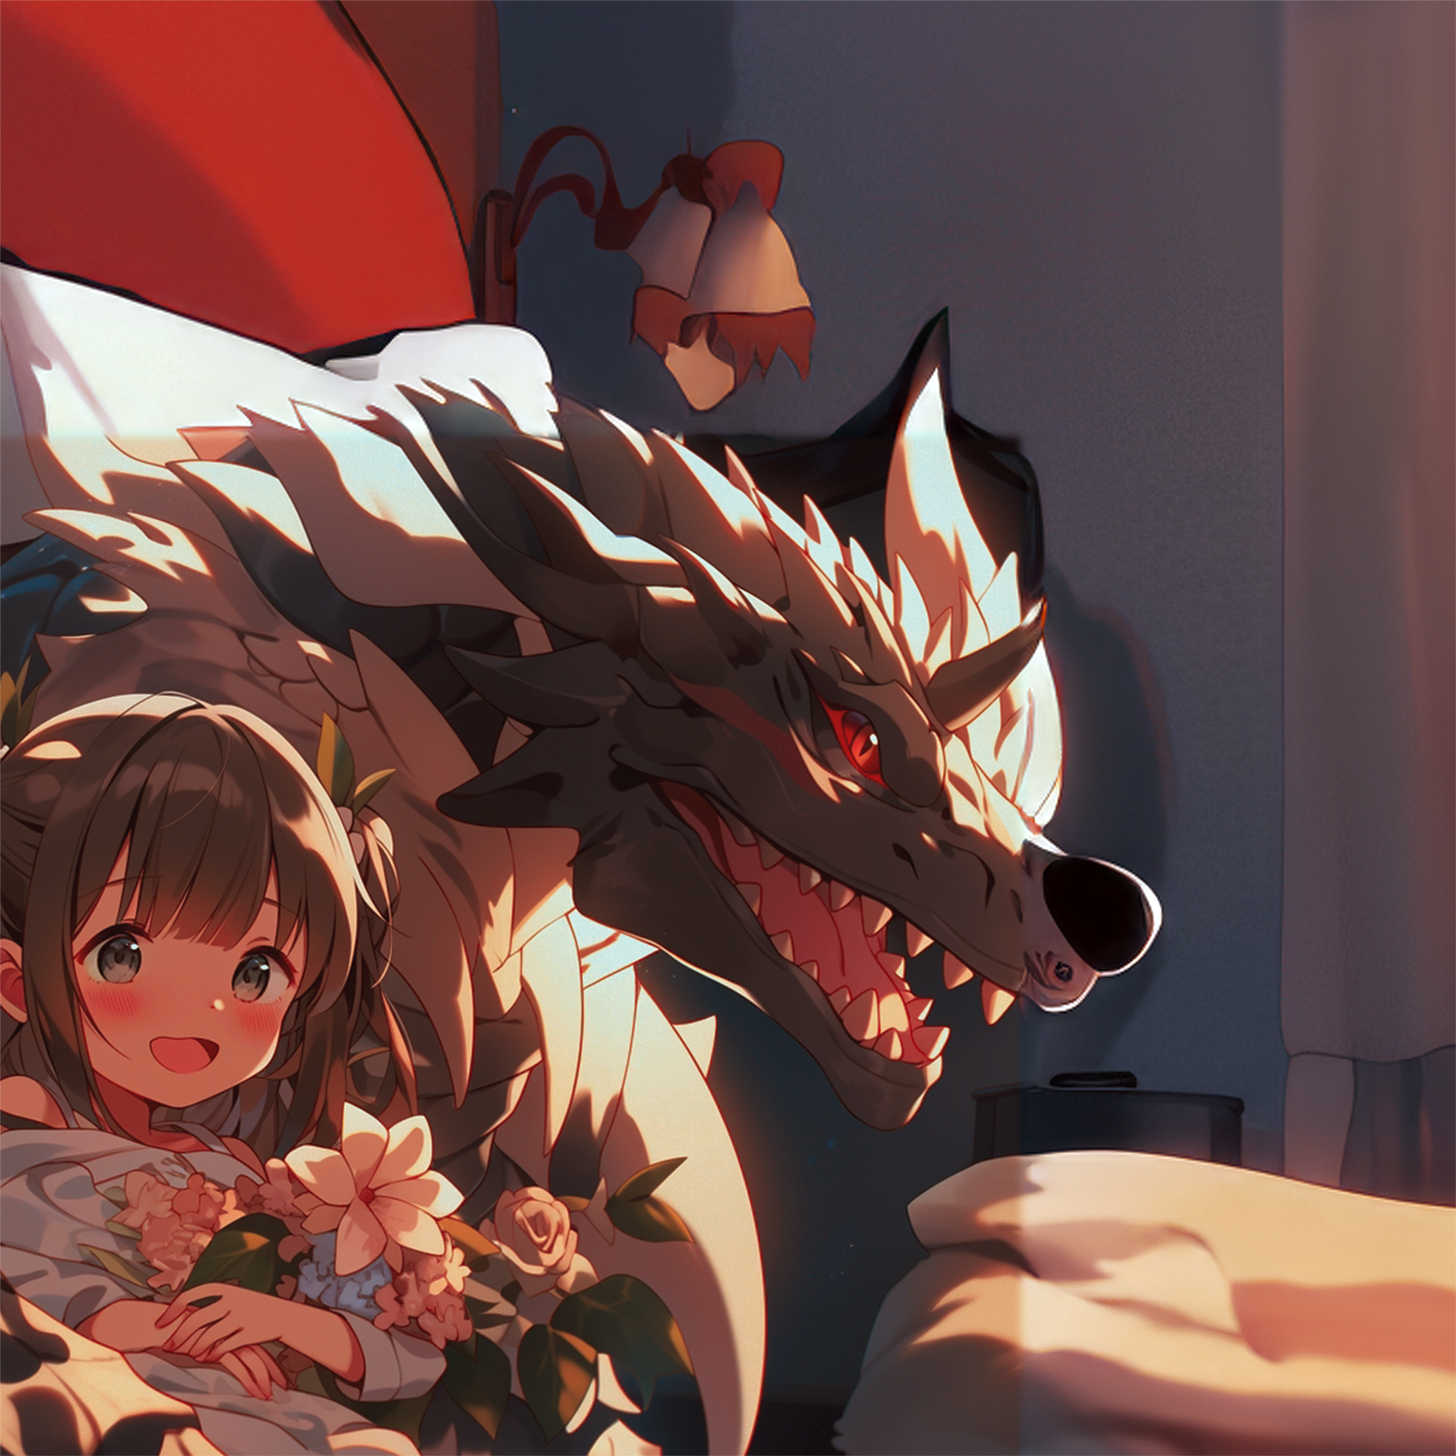 This is a digital illustration by the author, Johnny Profane Âû, titled "I Would Roar & Flex When You Can't." A cozy, dimly lit bedroom with a warm, inviting atmosphere in a painterly anime style. The scene shows a young child, sitting up in bed with a bright, happy smile. Behind the child, a large, fanciful stuffed Tyrannosaurus Rex appears, giving the impression of being a protective, comforting presence. The bed has a white blanket, and the room features soft, warm lighting. On the wall above the bed, a small lamp provides a gentle glow, enhancing the cozy feel of the room. The child's expression and the presence of the stuffed dinosaur evoke feelings of safety, imagination, and the simple joy of bedtime routines, highlighting the bond between the child and their beloved toy. The anime style engages both children of this generation and invokes memories for adults reading it. Digital tools included AI.